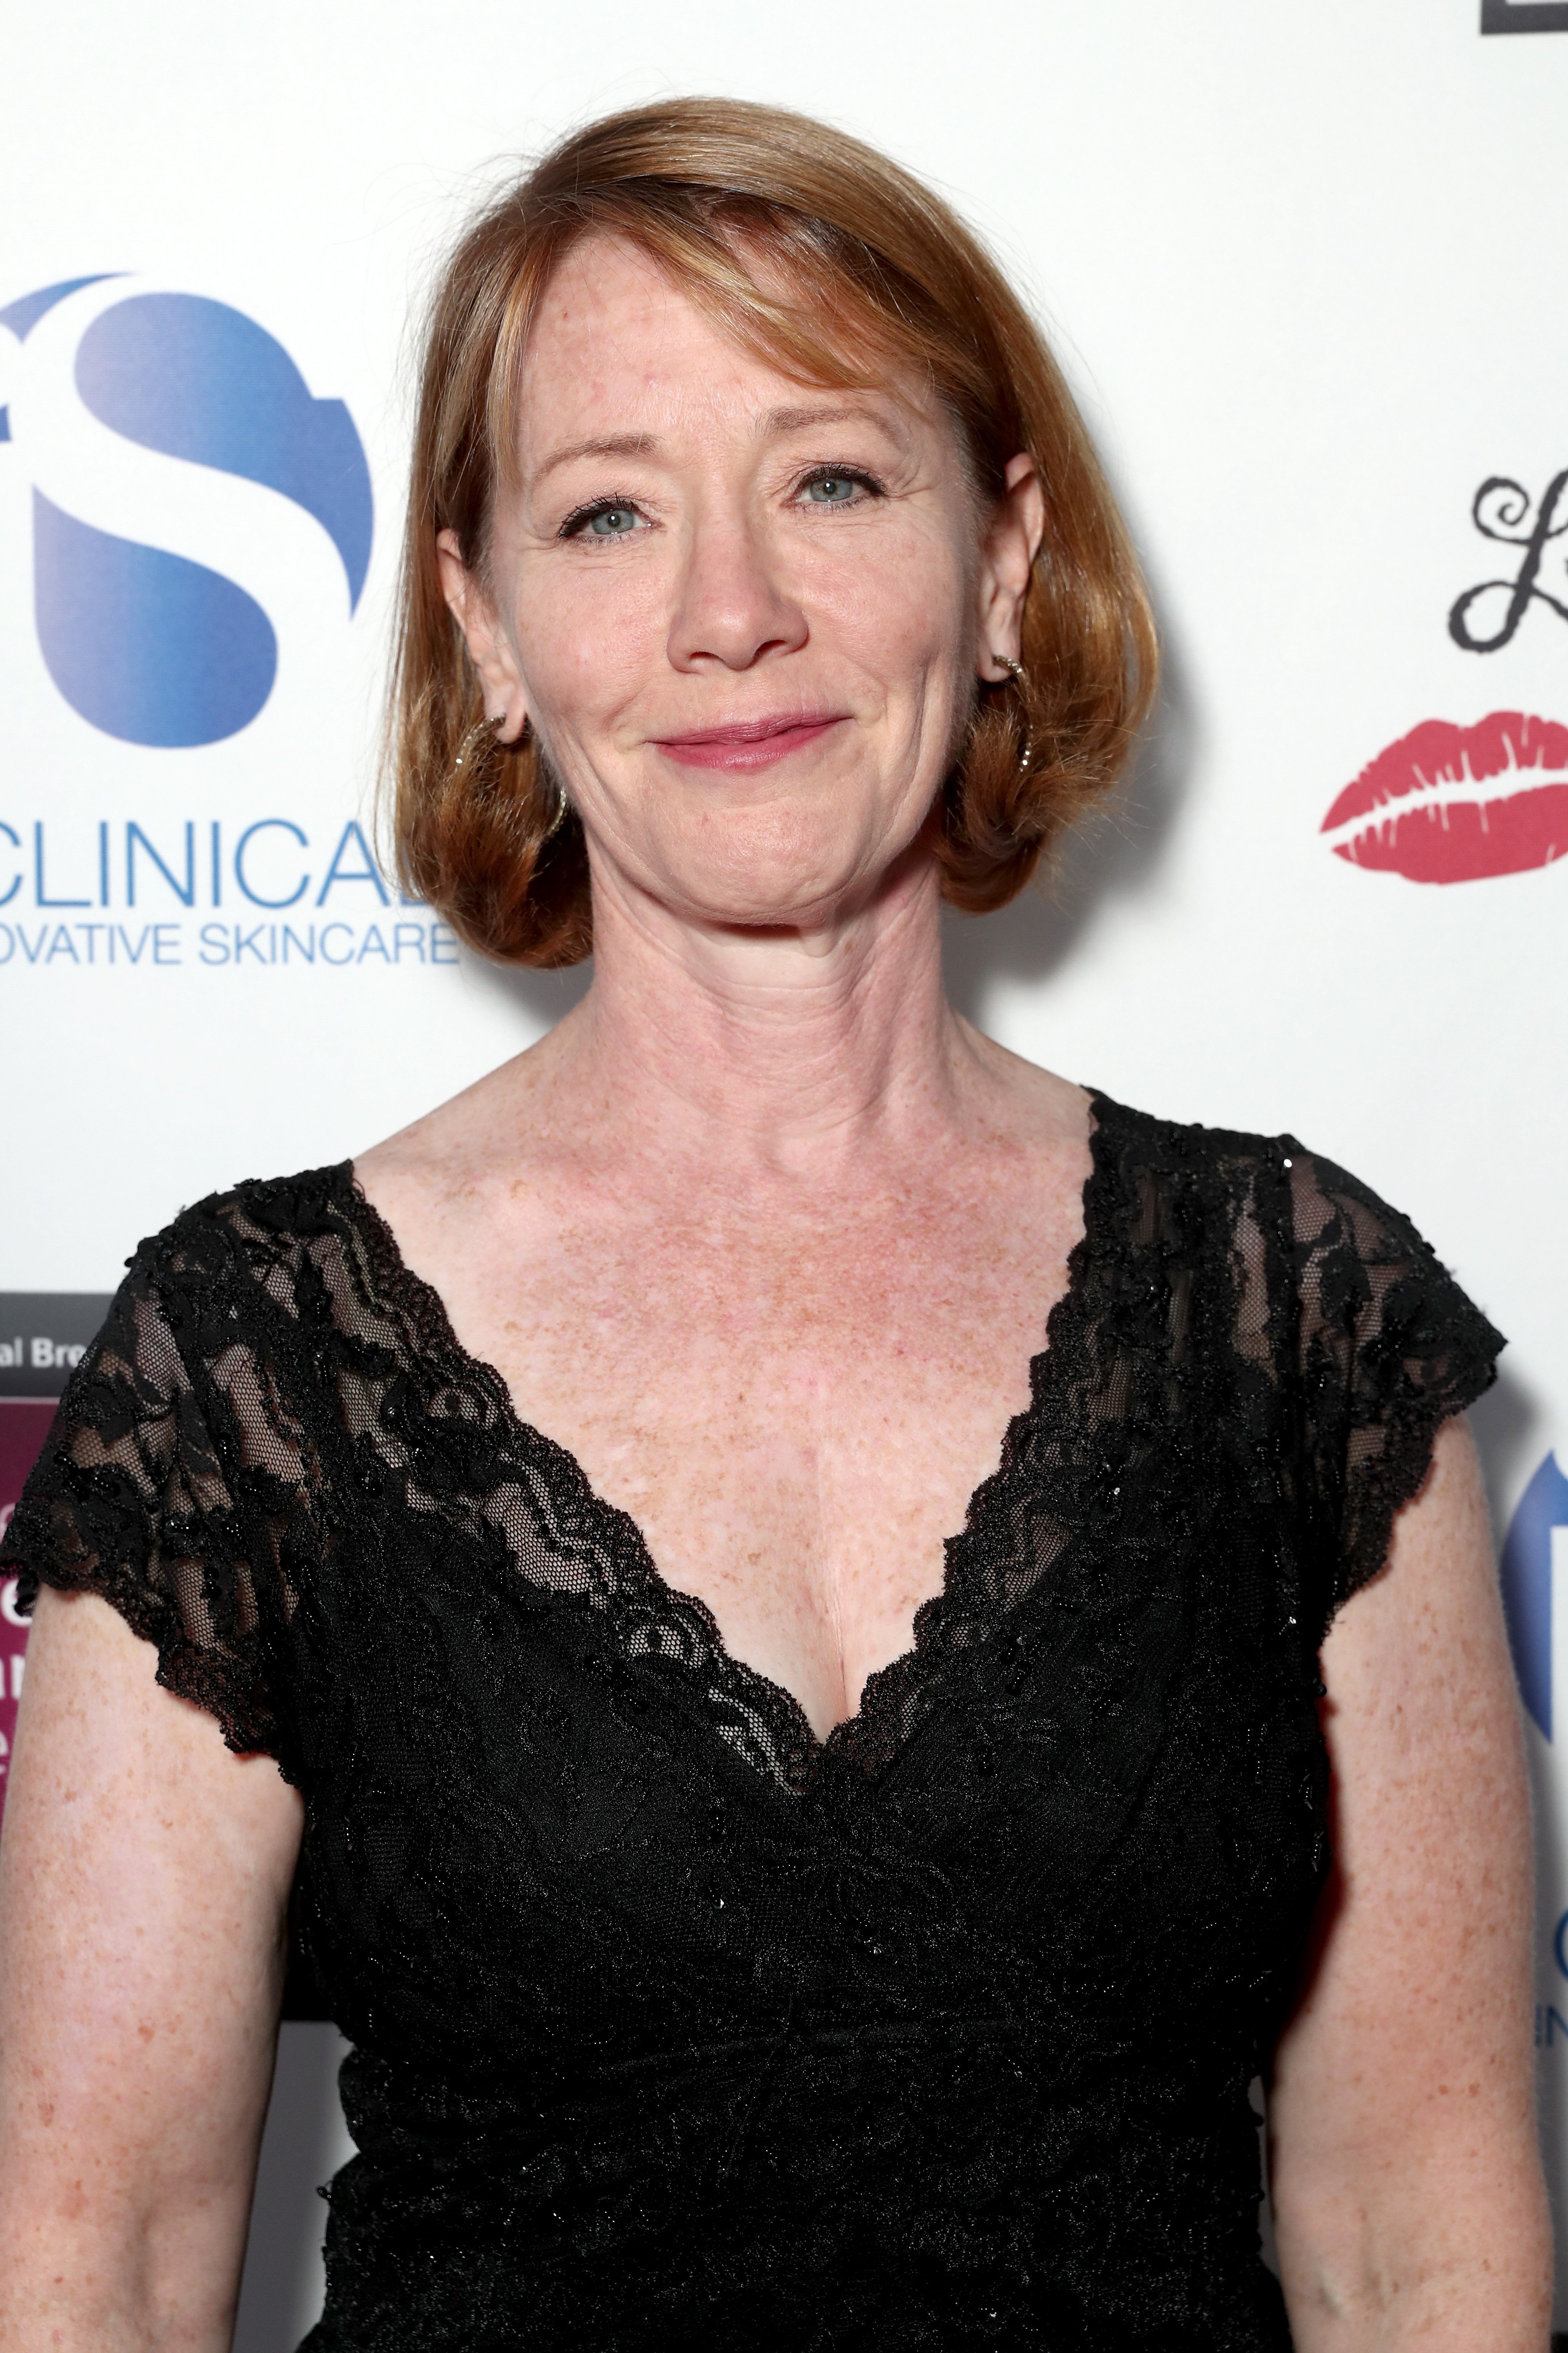  Ann Cusack at the National Breast Cancer Coalition Fund's 17th Annual Les Girls Cabaret in 2017 in Los Angeles, California. | Source: Getty Images